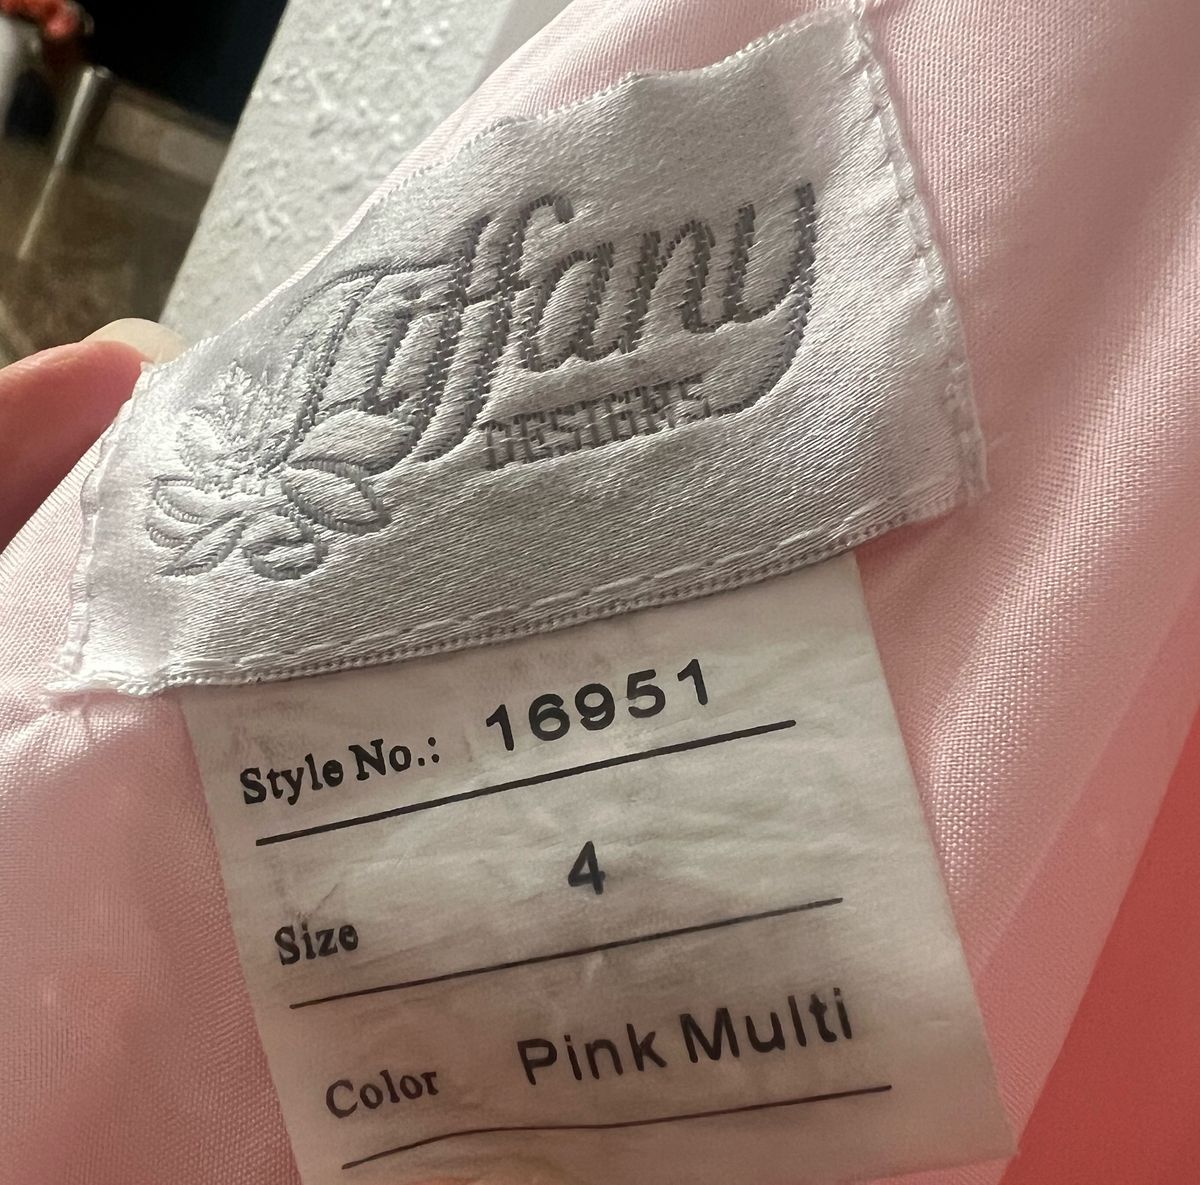 Tiffany Designs Size 4 Prom Pink Ball Gown on Queenly